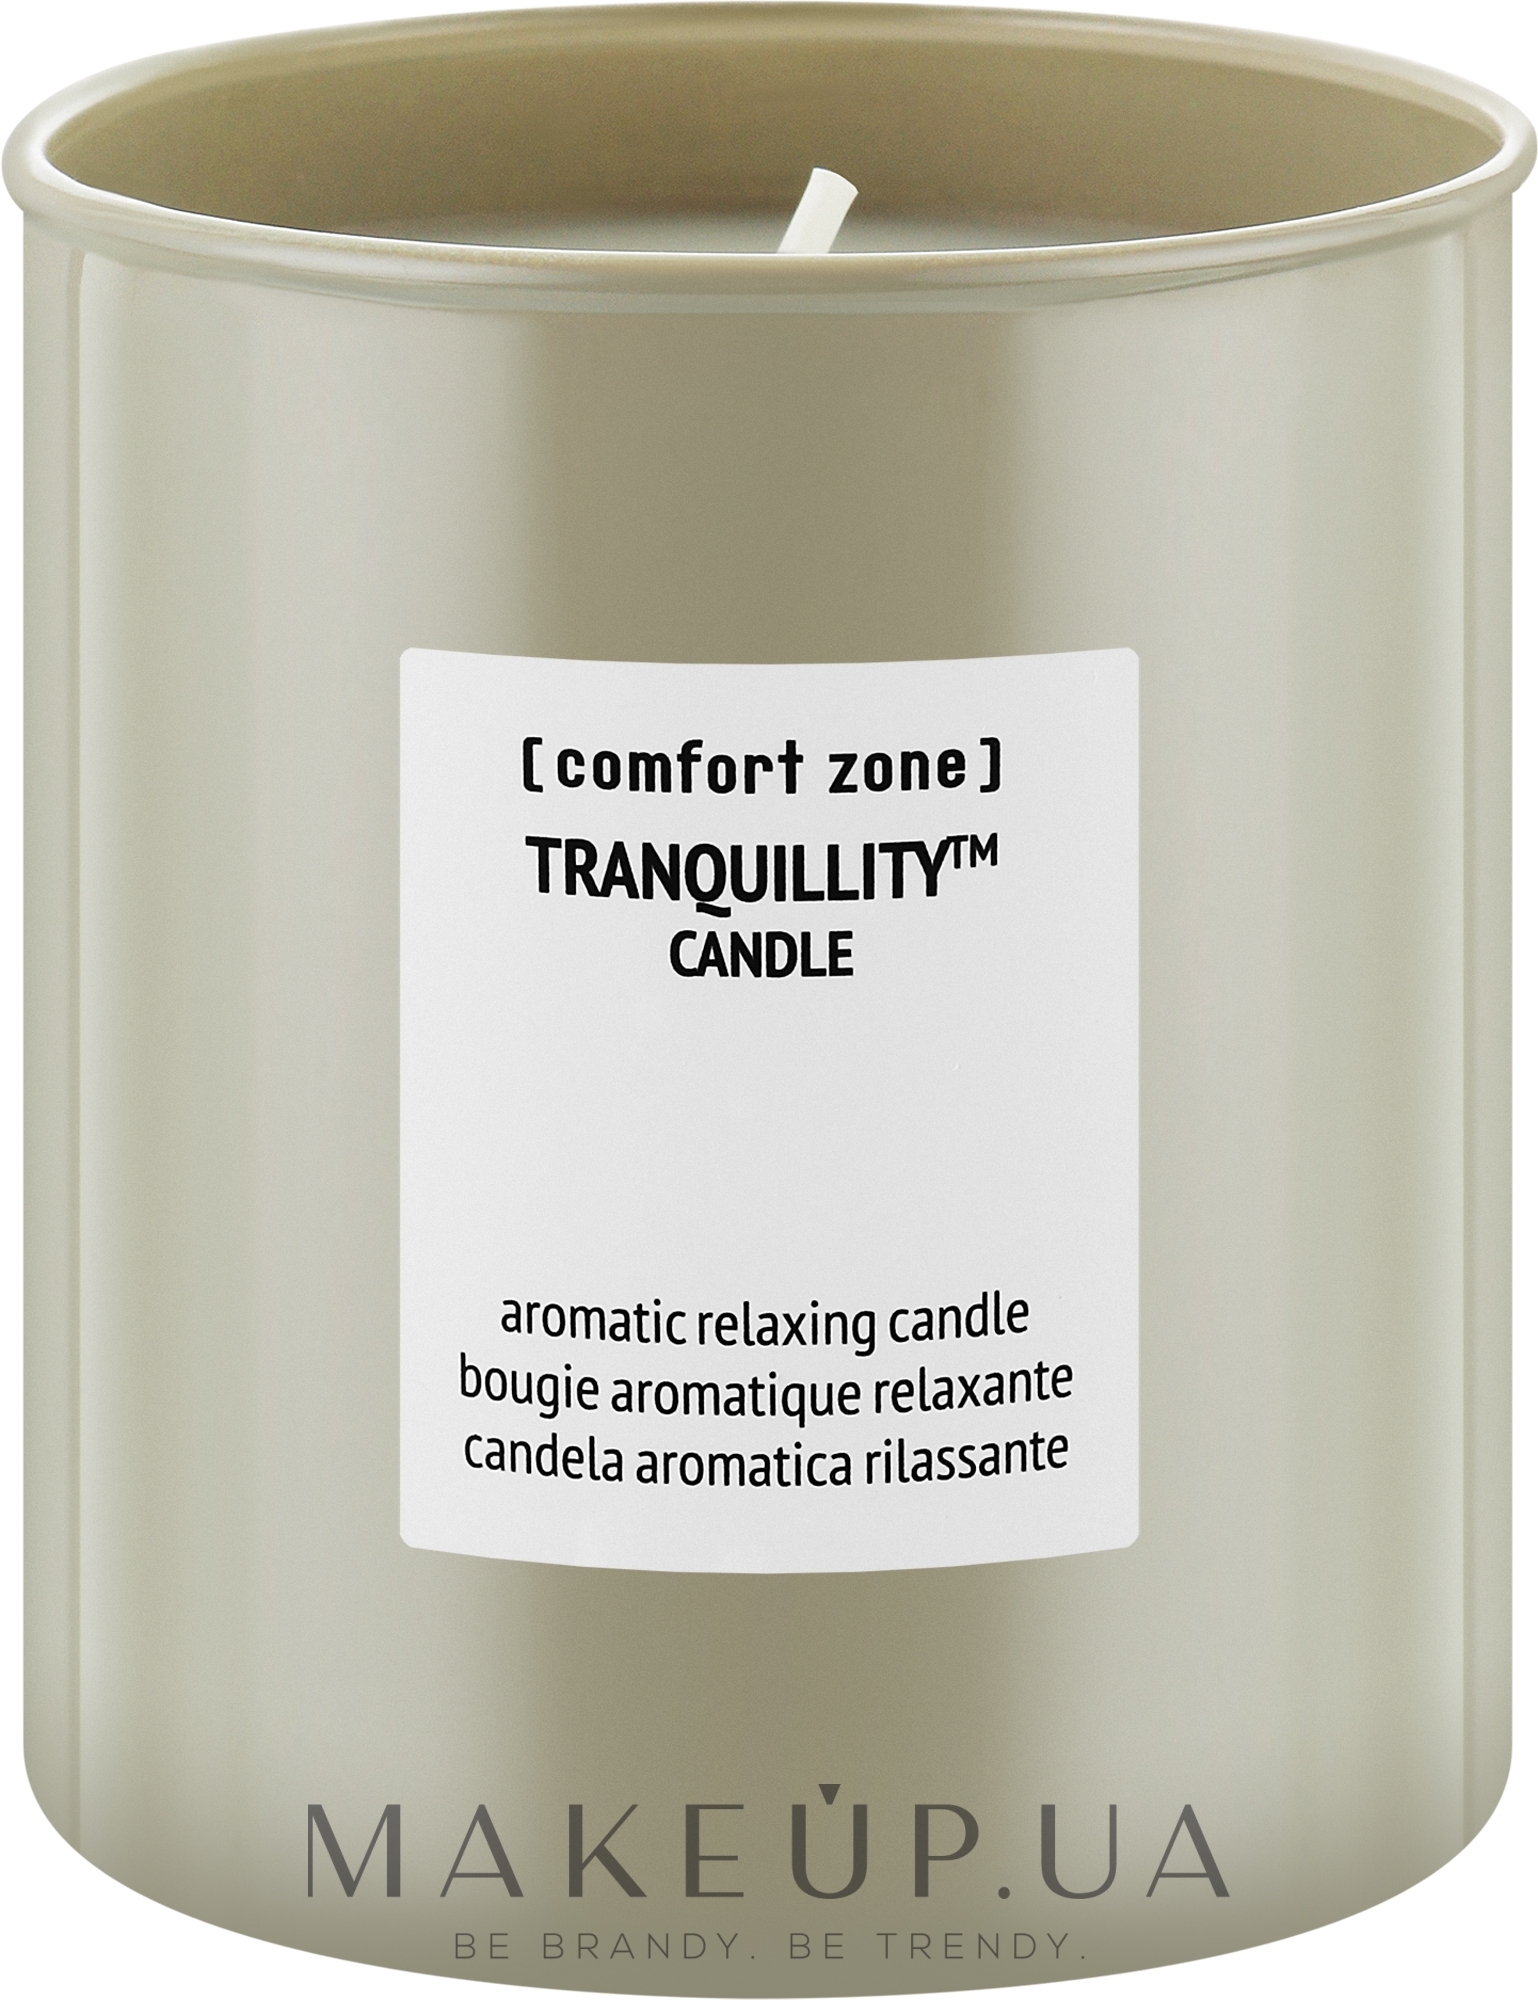 Comfort Zone Tranquillity Candle 280g - Face Mediskin